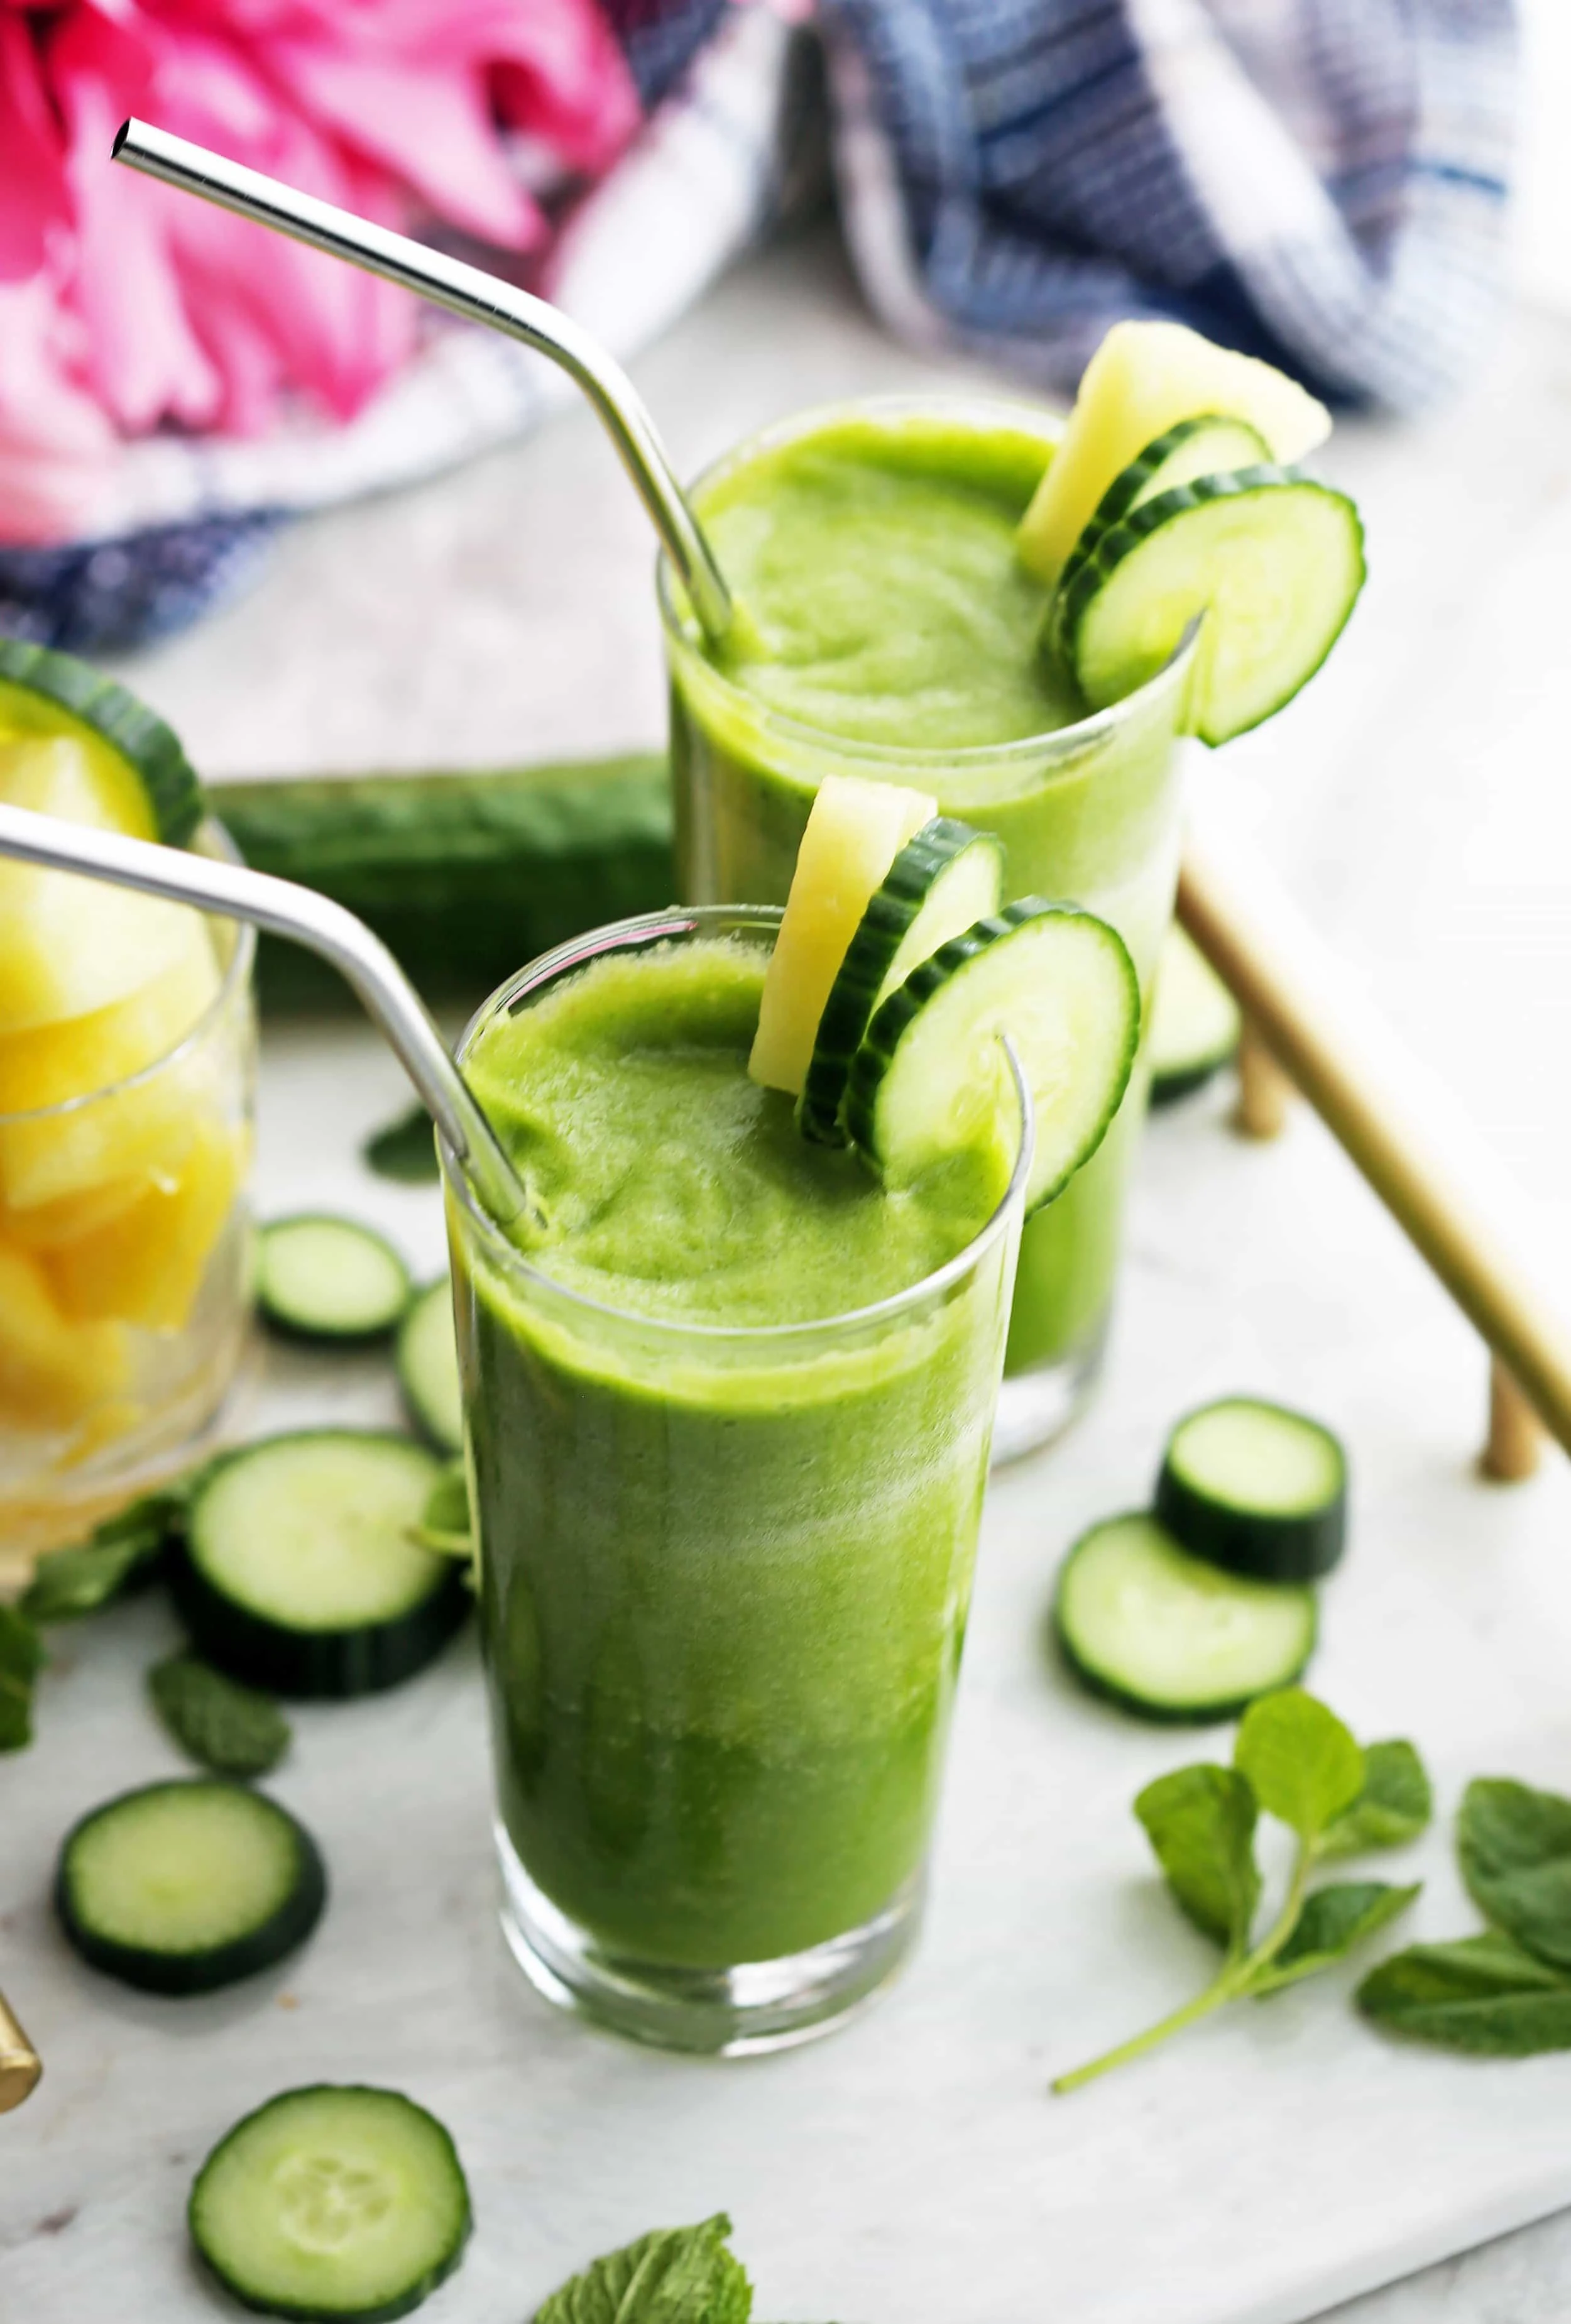 Two tall glasses of Cucumber Mint Pineapple Green Smoothies garnished with and surrounded by cucumber and pineapple slices and fresh mint.